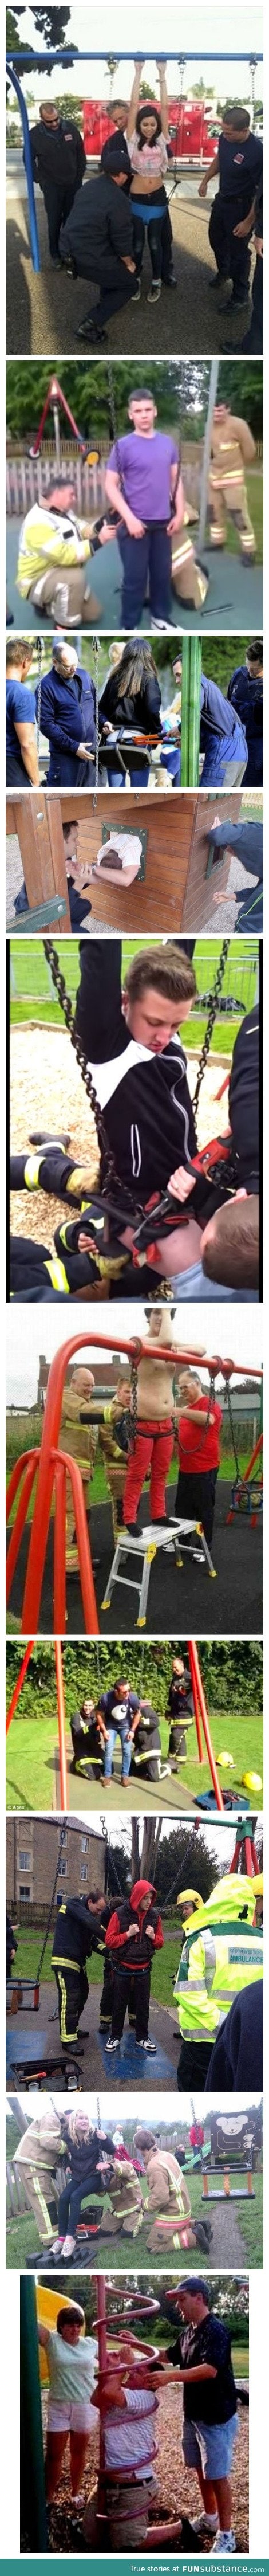 Who knew playgrounds were so dangerous?